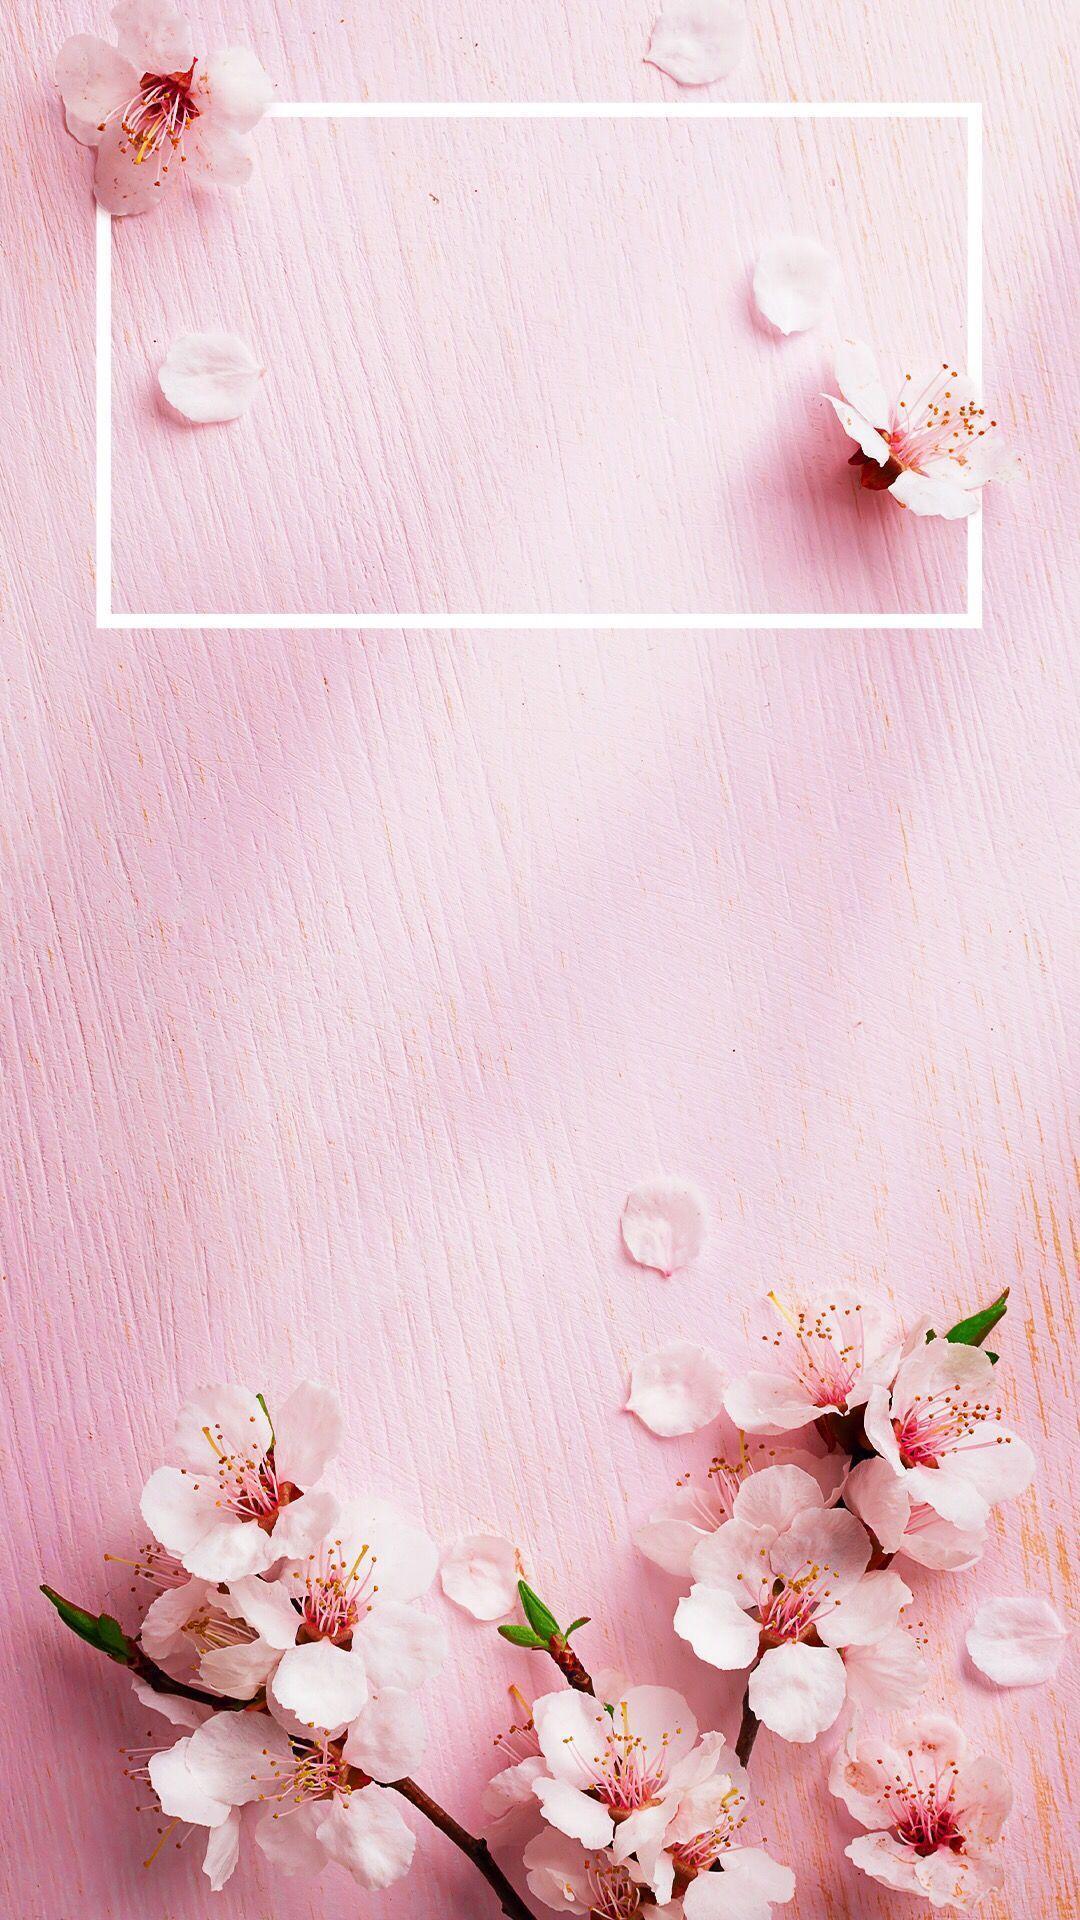 Aesthetic phone background with a white frame and cherry blossoms - Spring, rose gold